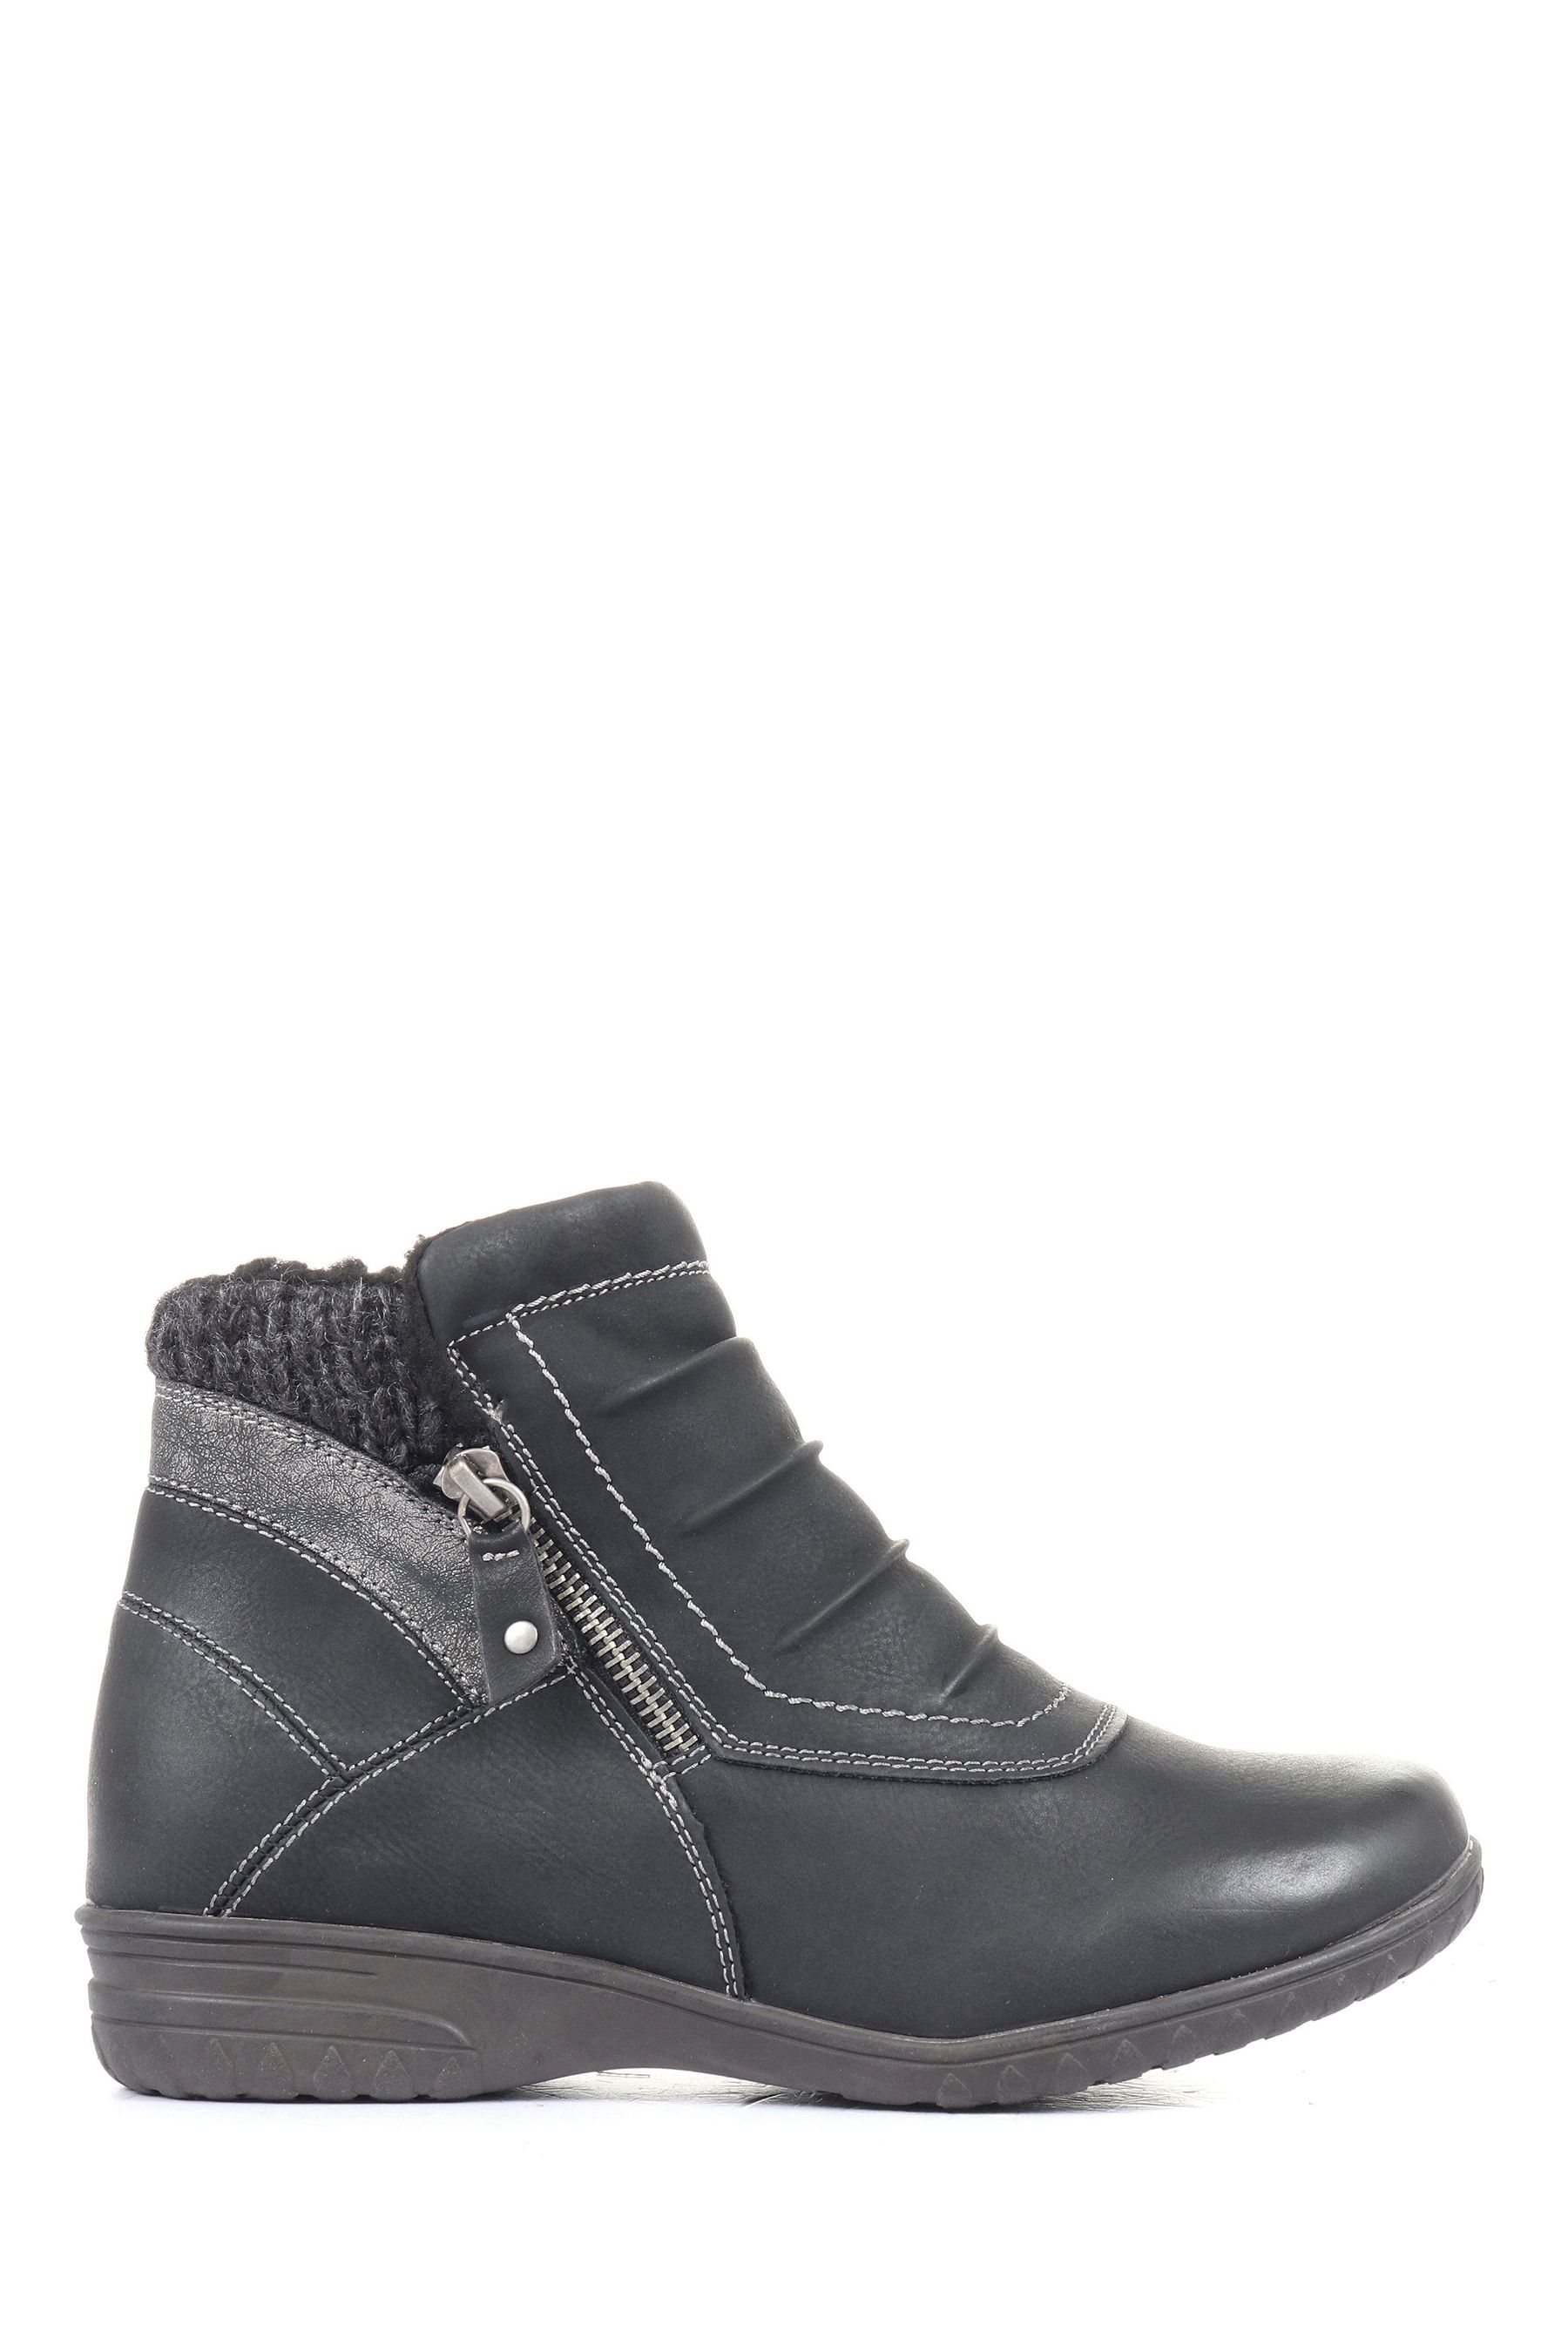 Buy Pavers Ladies Ruched Ankle Boots from the Next UK online shop